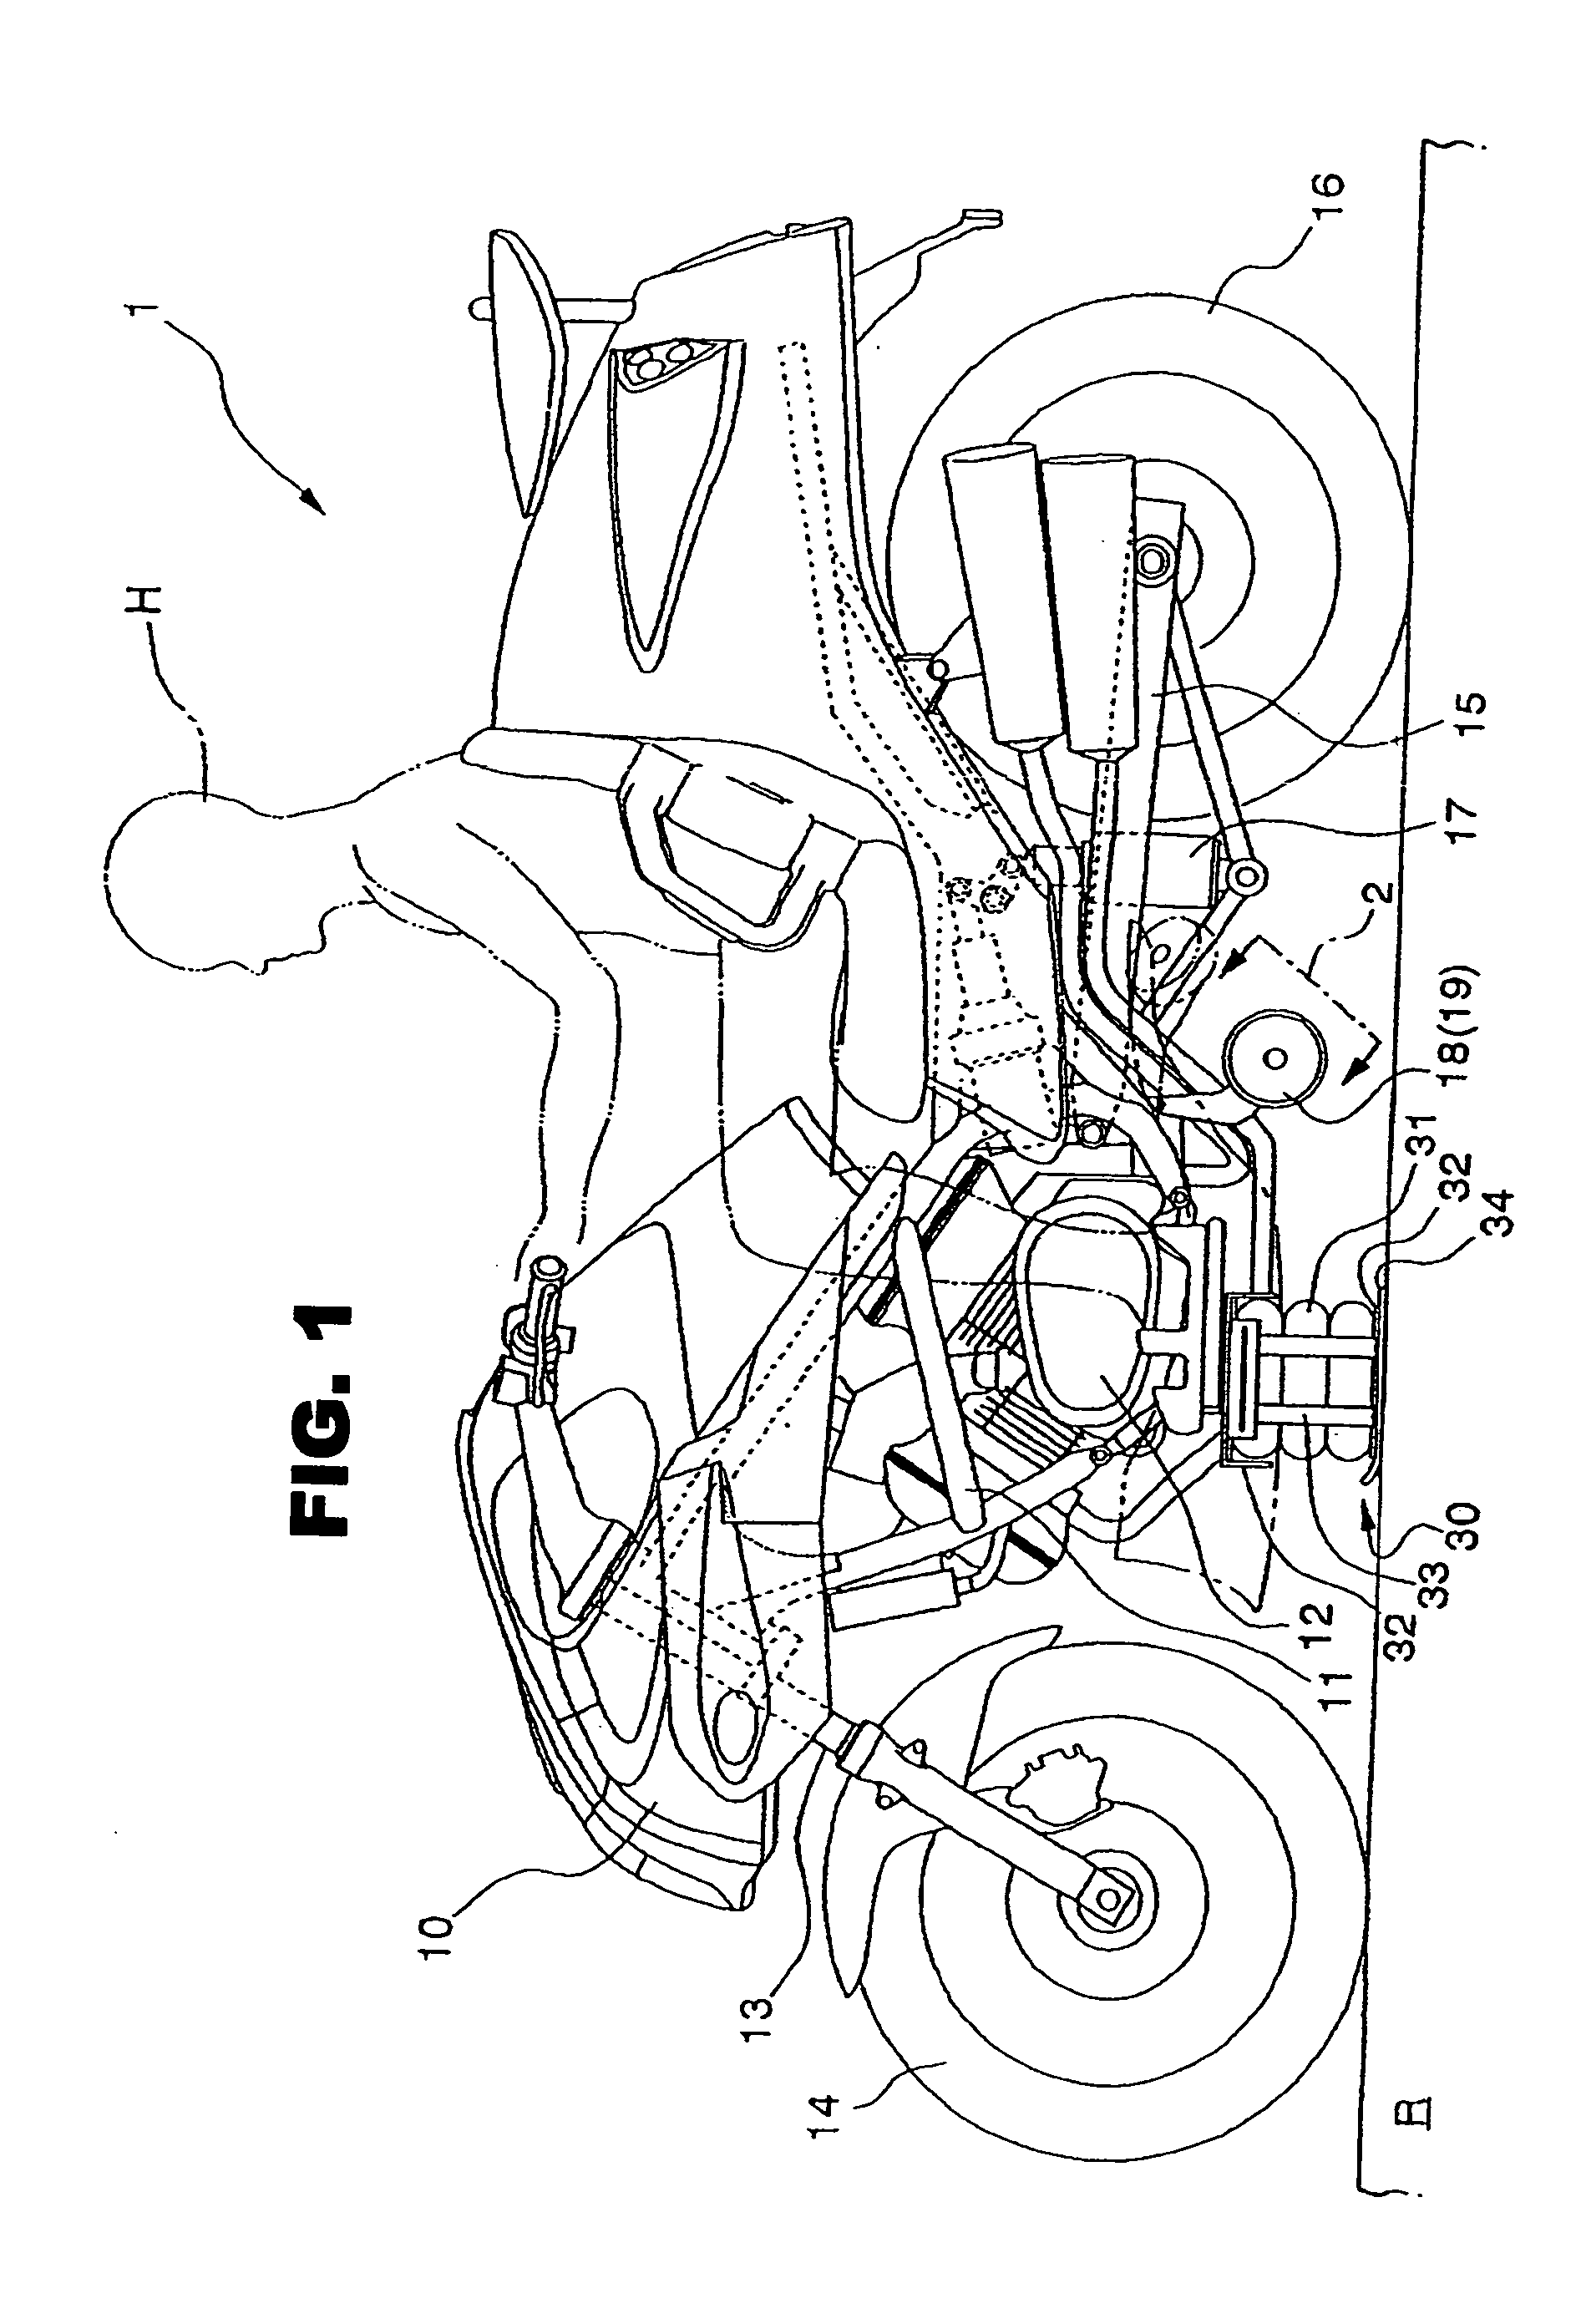 Motorcycle with auxiliary support